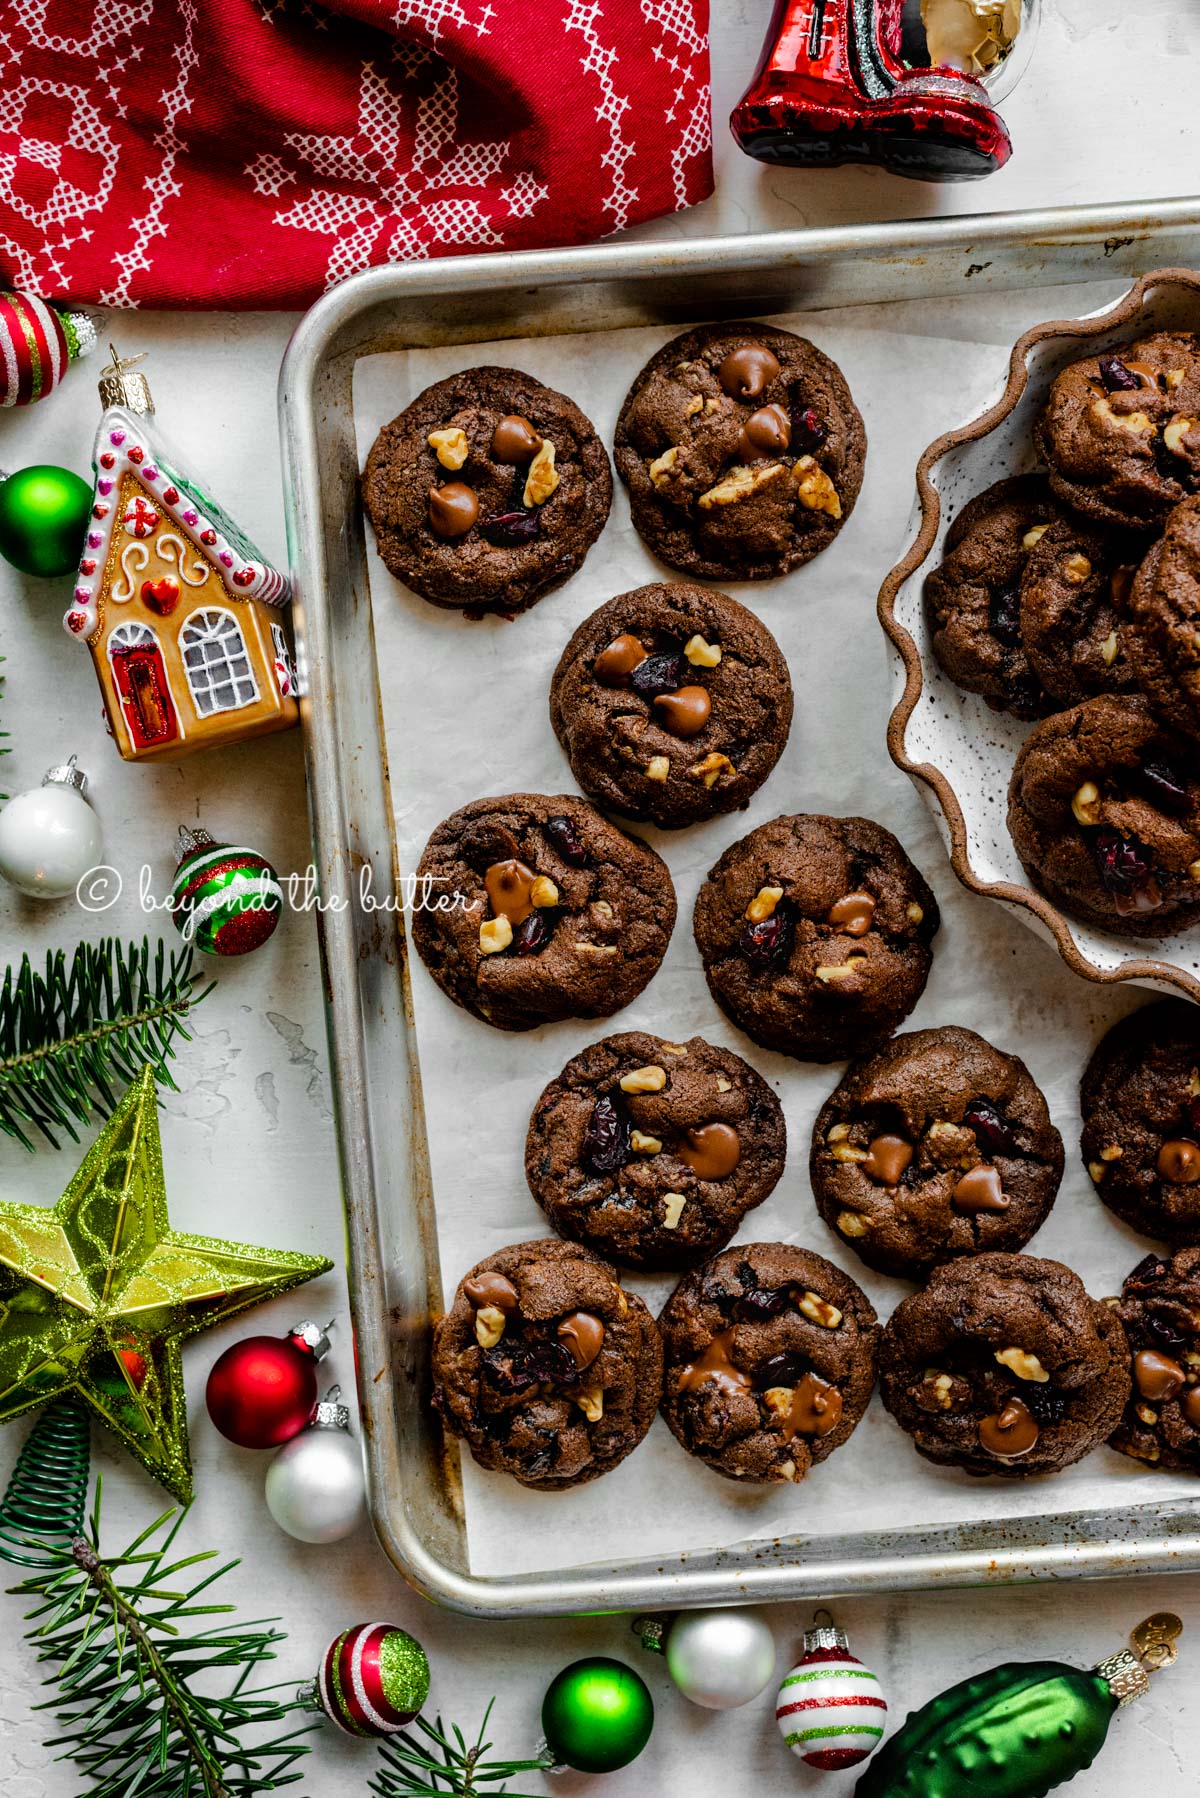 Parchment paper lined baking sheet with dark chocolate cranberry walnut cookies surrounded Christmas tree ornaments | All Images © Beyond the Butter®